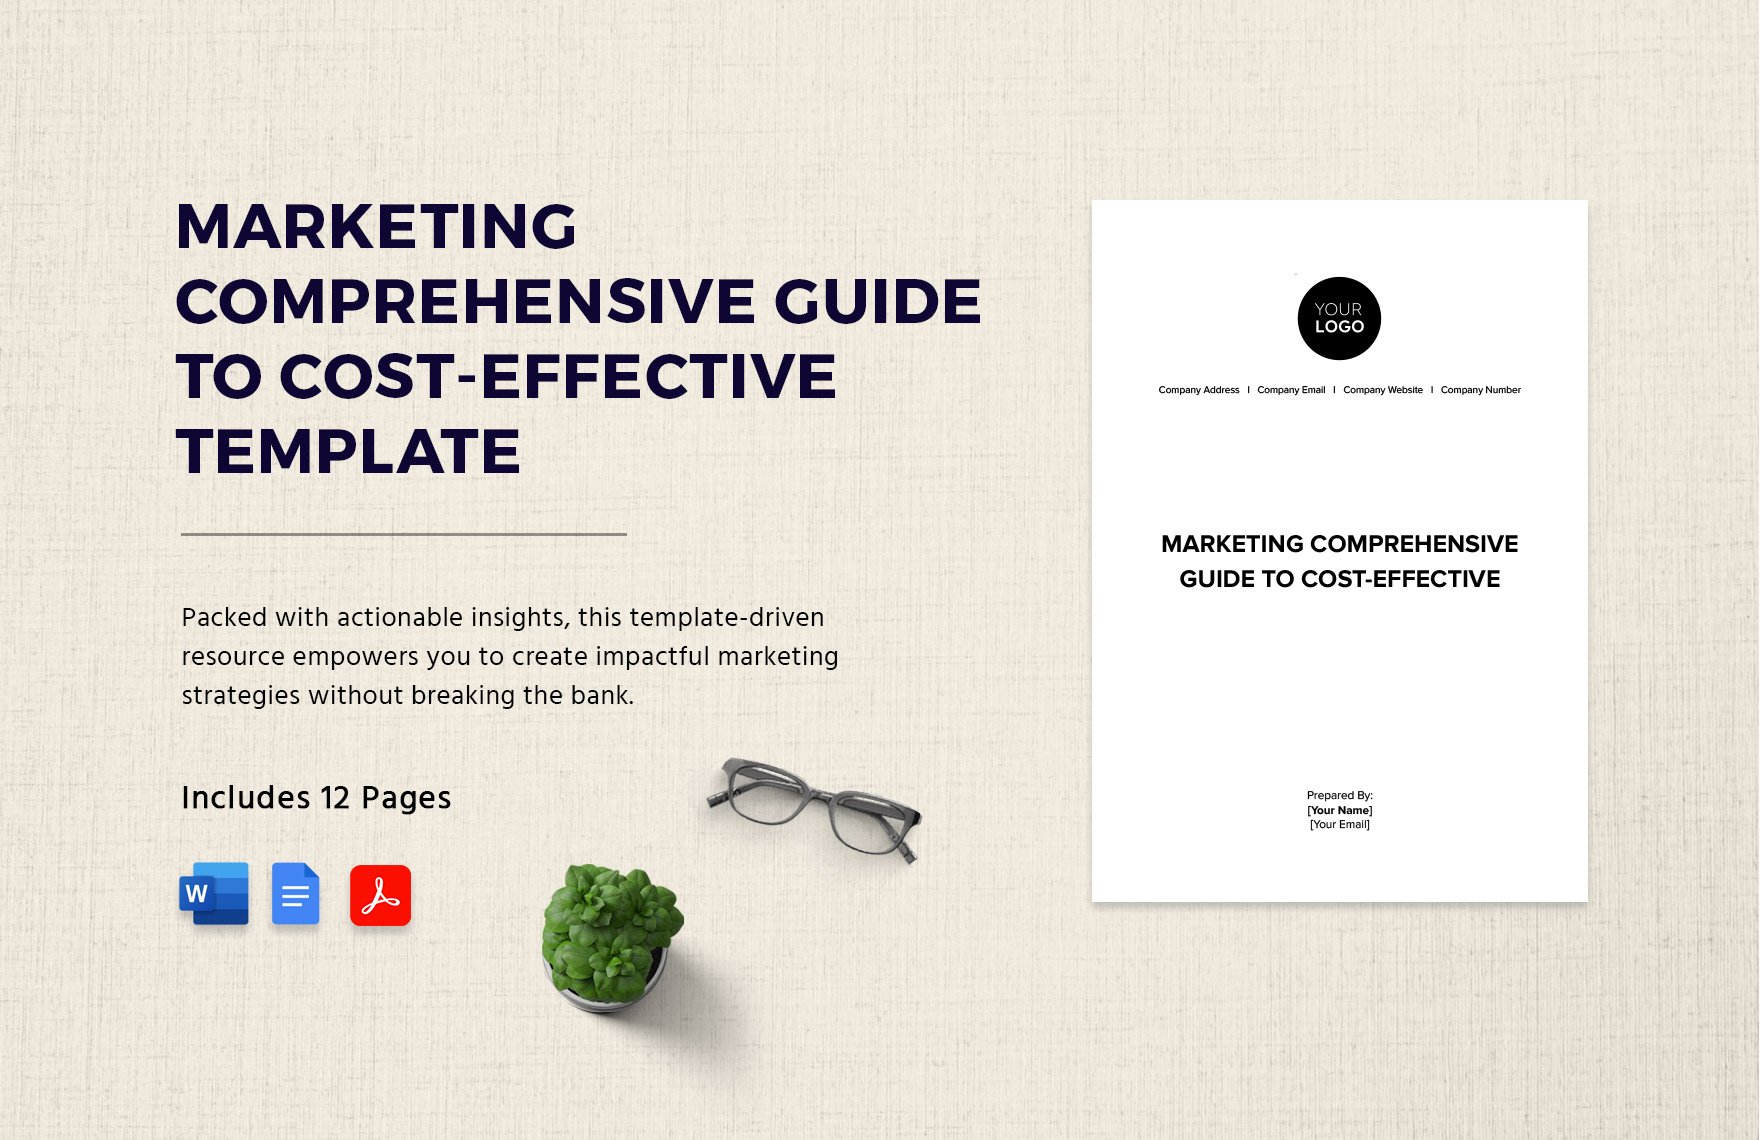 Marketing Comprehensive Guide to Cost-Effective Template